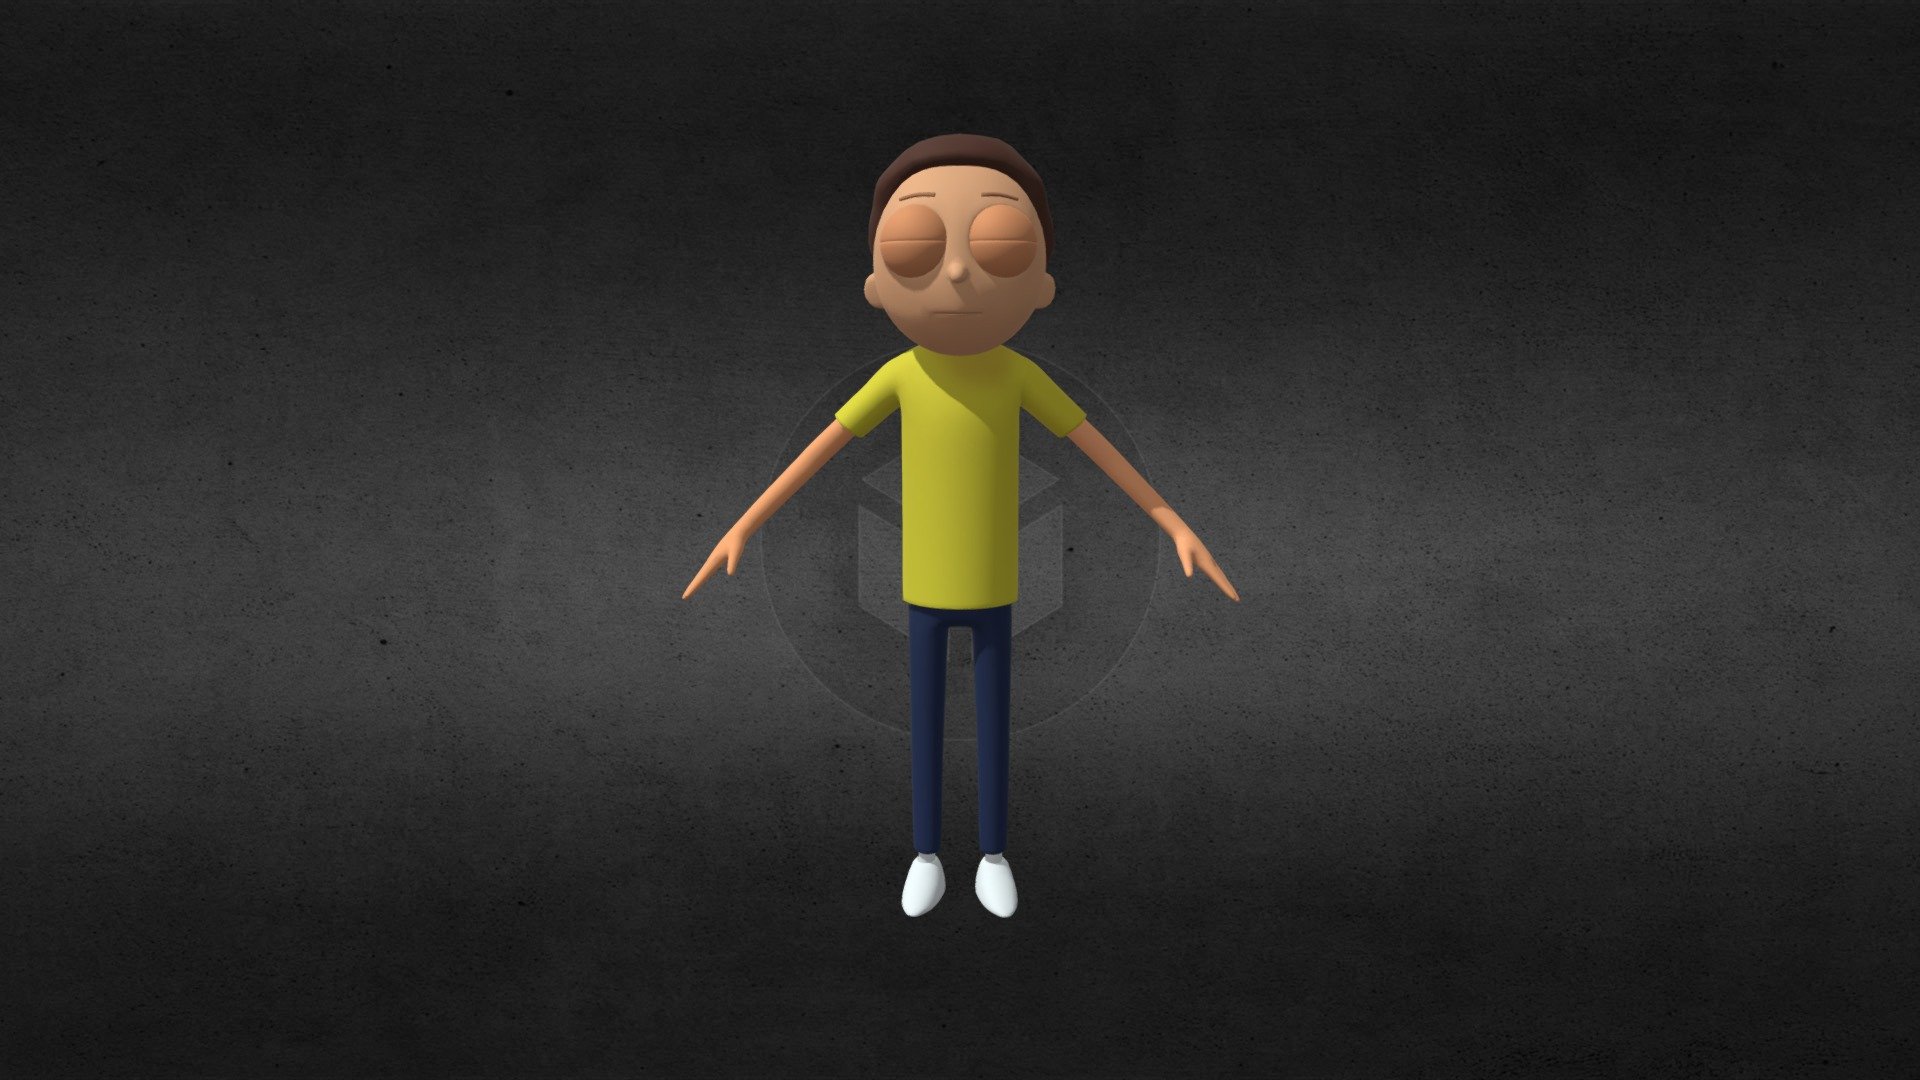 ill be adding the rest of the characters soon so stay tuned! also gonna make a prop pack aswell so yeah

-Credit Multiversus - Multiversus Morty - Download Free 3D model by peterthepunk123456 3d model